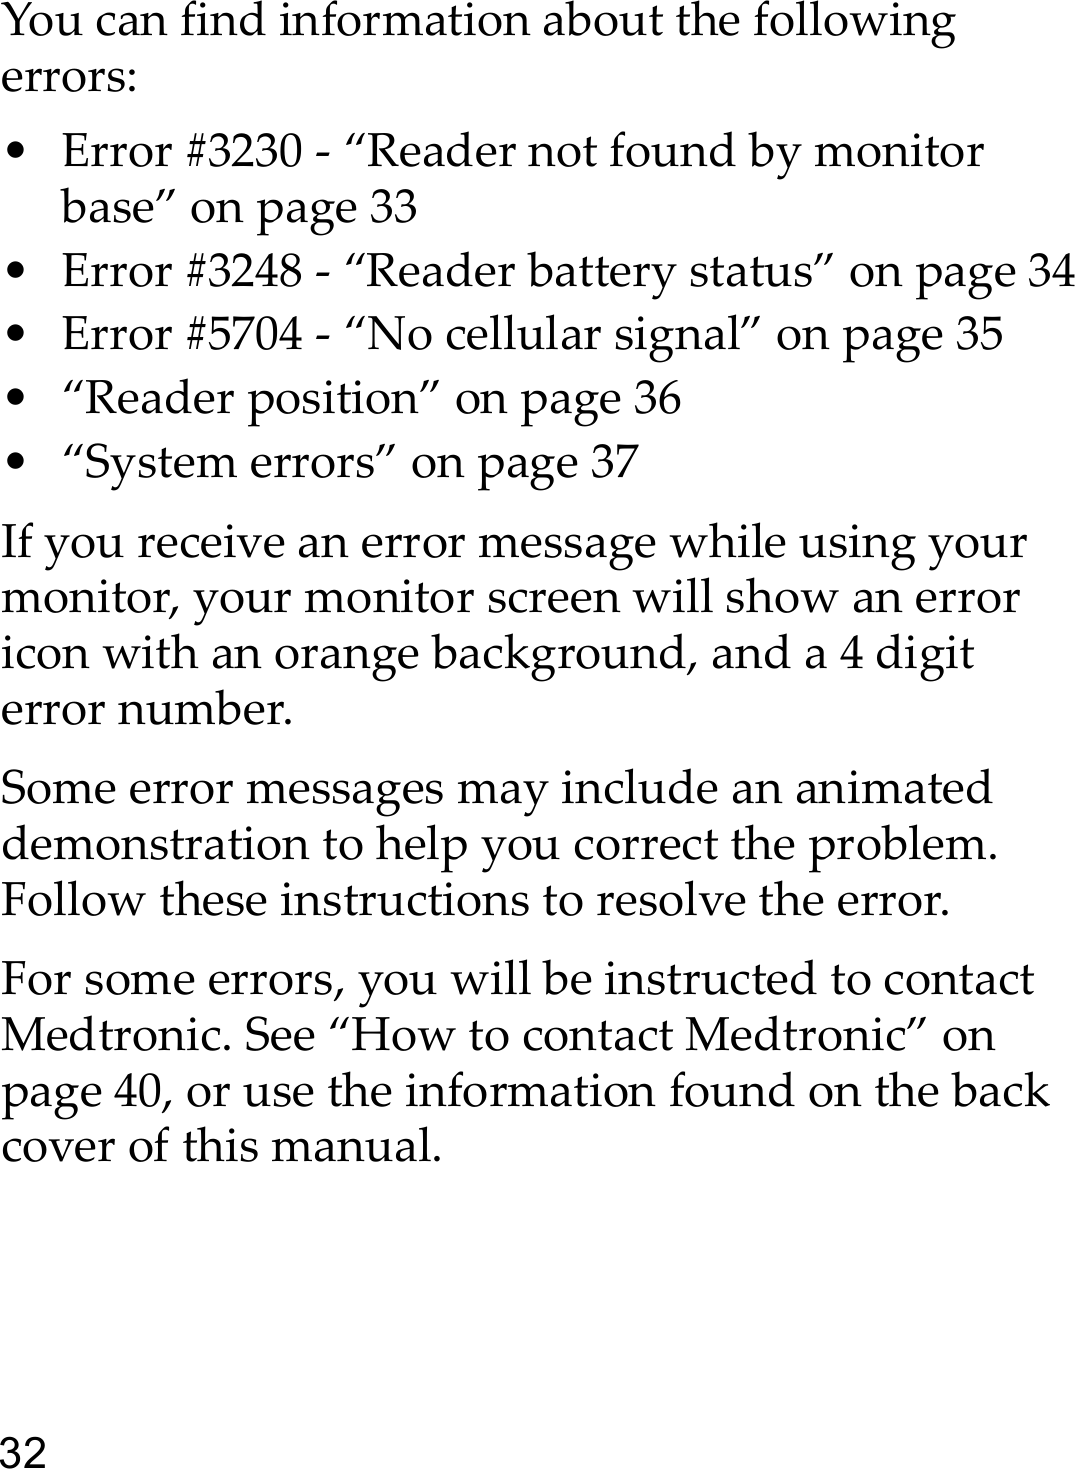 32You can find information about the following errors:• Error #3230 - “Reader not found by monitor base” on page 33• Error #3248 - “Reader battery status” on page 34• Error #5704 - “No cellular signal” on page 35• “Reader position” on page 36• “System errors” on page 37If you receive an error message while using your monitor, your monitor screen will show an error icon with an orange background, and a 4 digit error number.Some error messages may include an animated demonstration to help you correct the problem. Follow these instructions to resolve the error.For some errors, you will be instructed to contact Medtronic. See “How to contact Medtronic” on page 40, or use the information found on the back cover of this manual. 